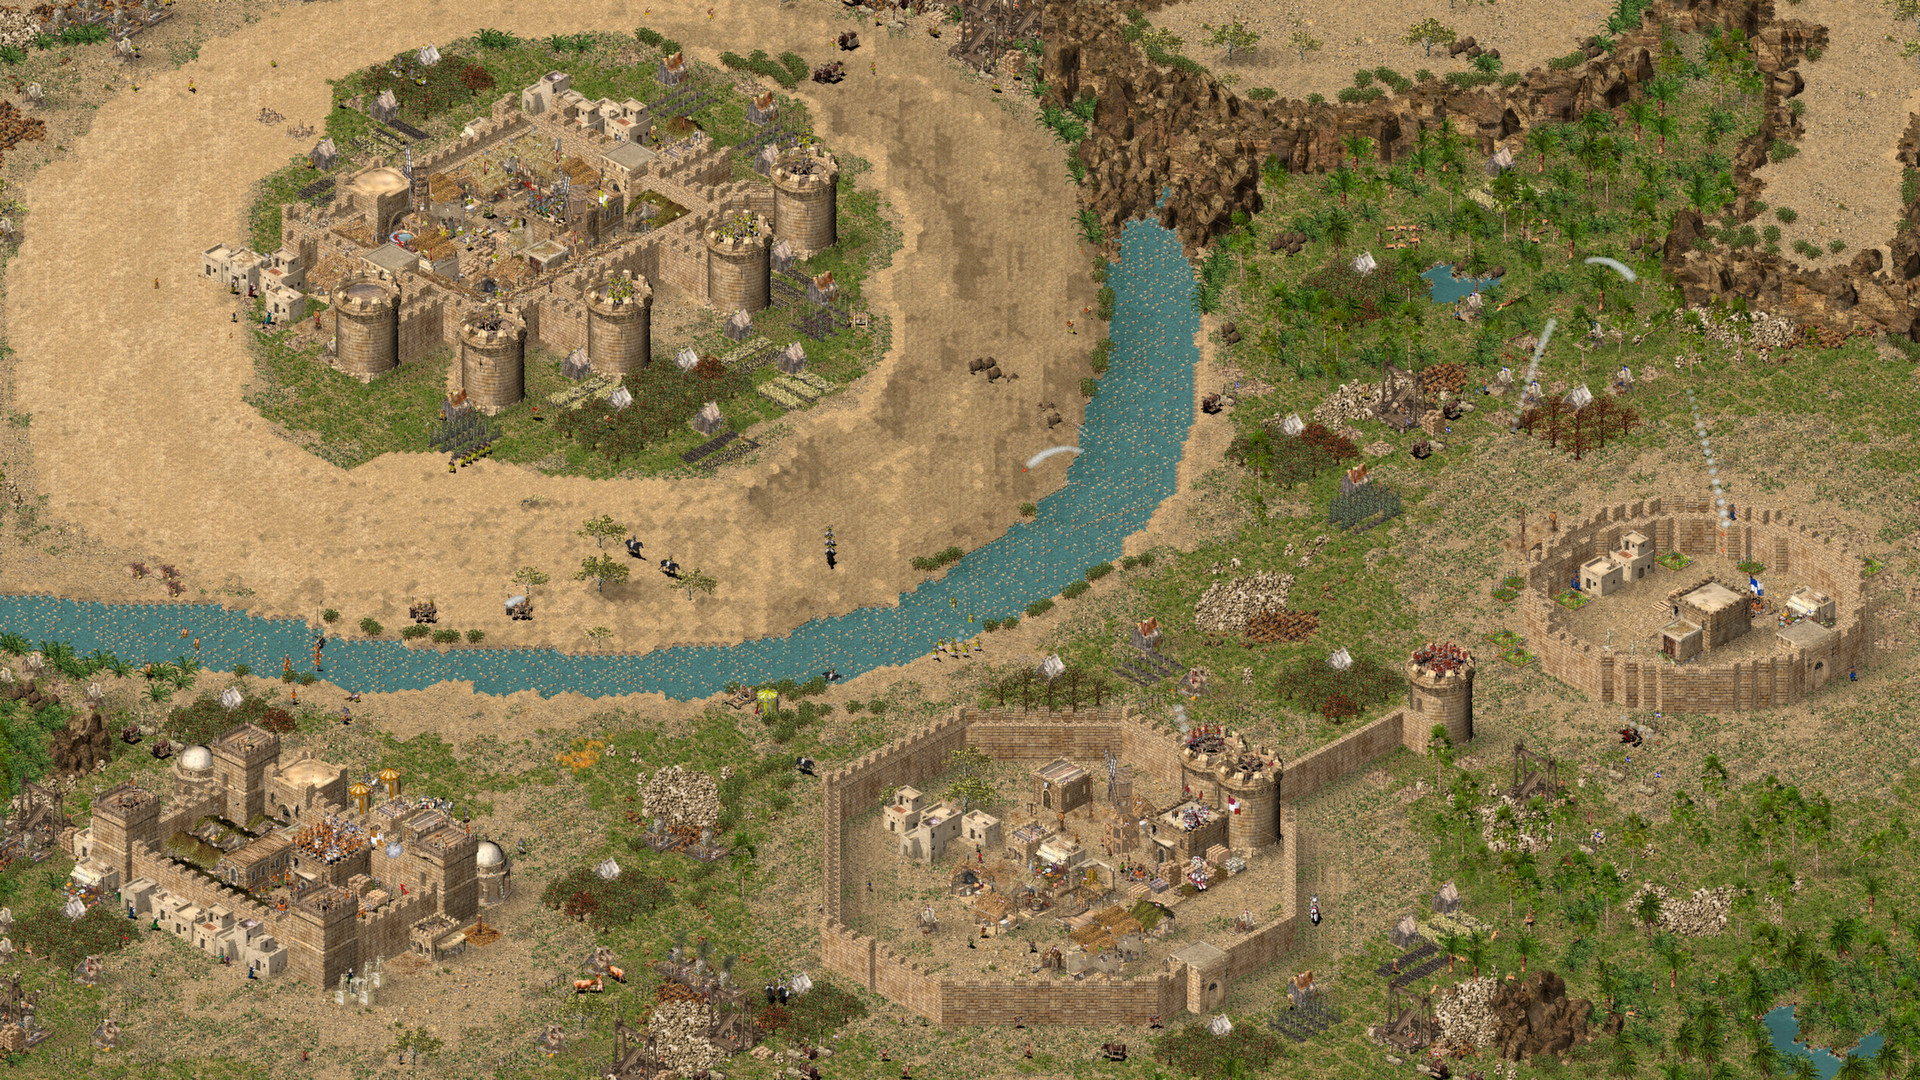 stronghold free download full version